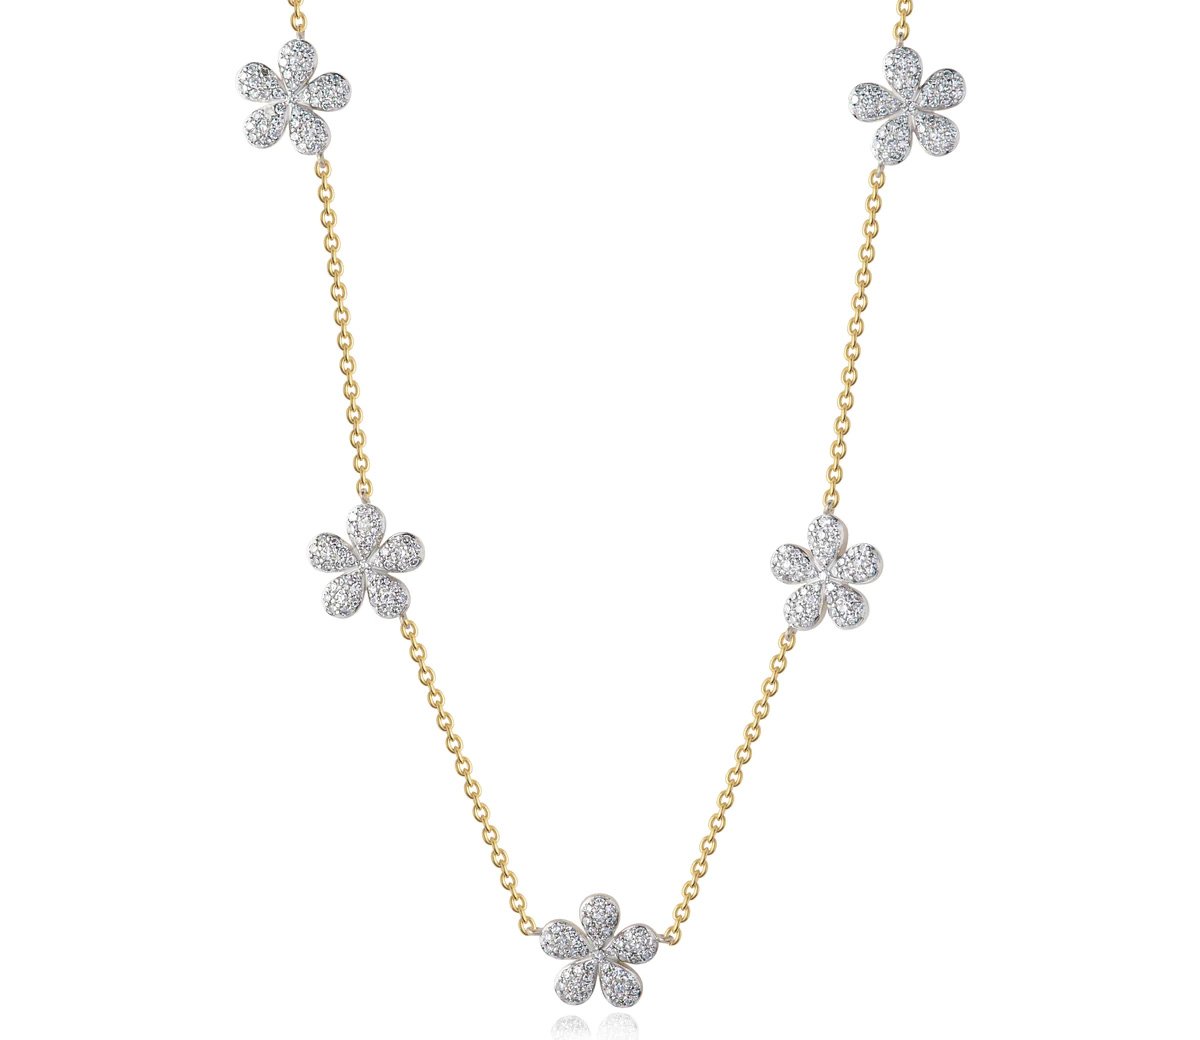 Phillips House "Affair" 14kt Yellow Gold Five Station Forget-Me-Not Petite Necklace